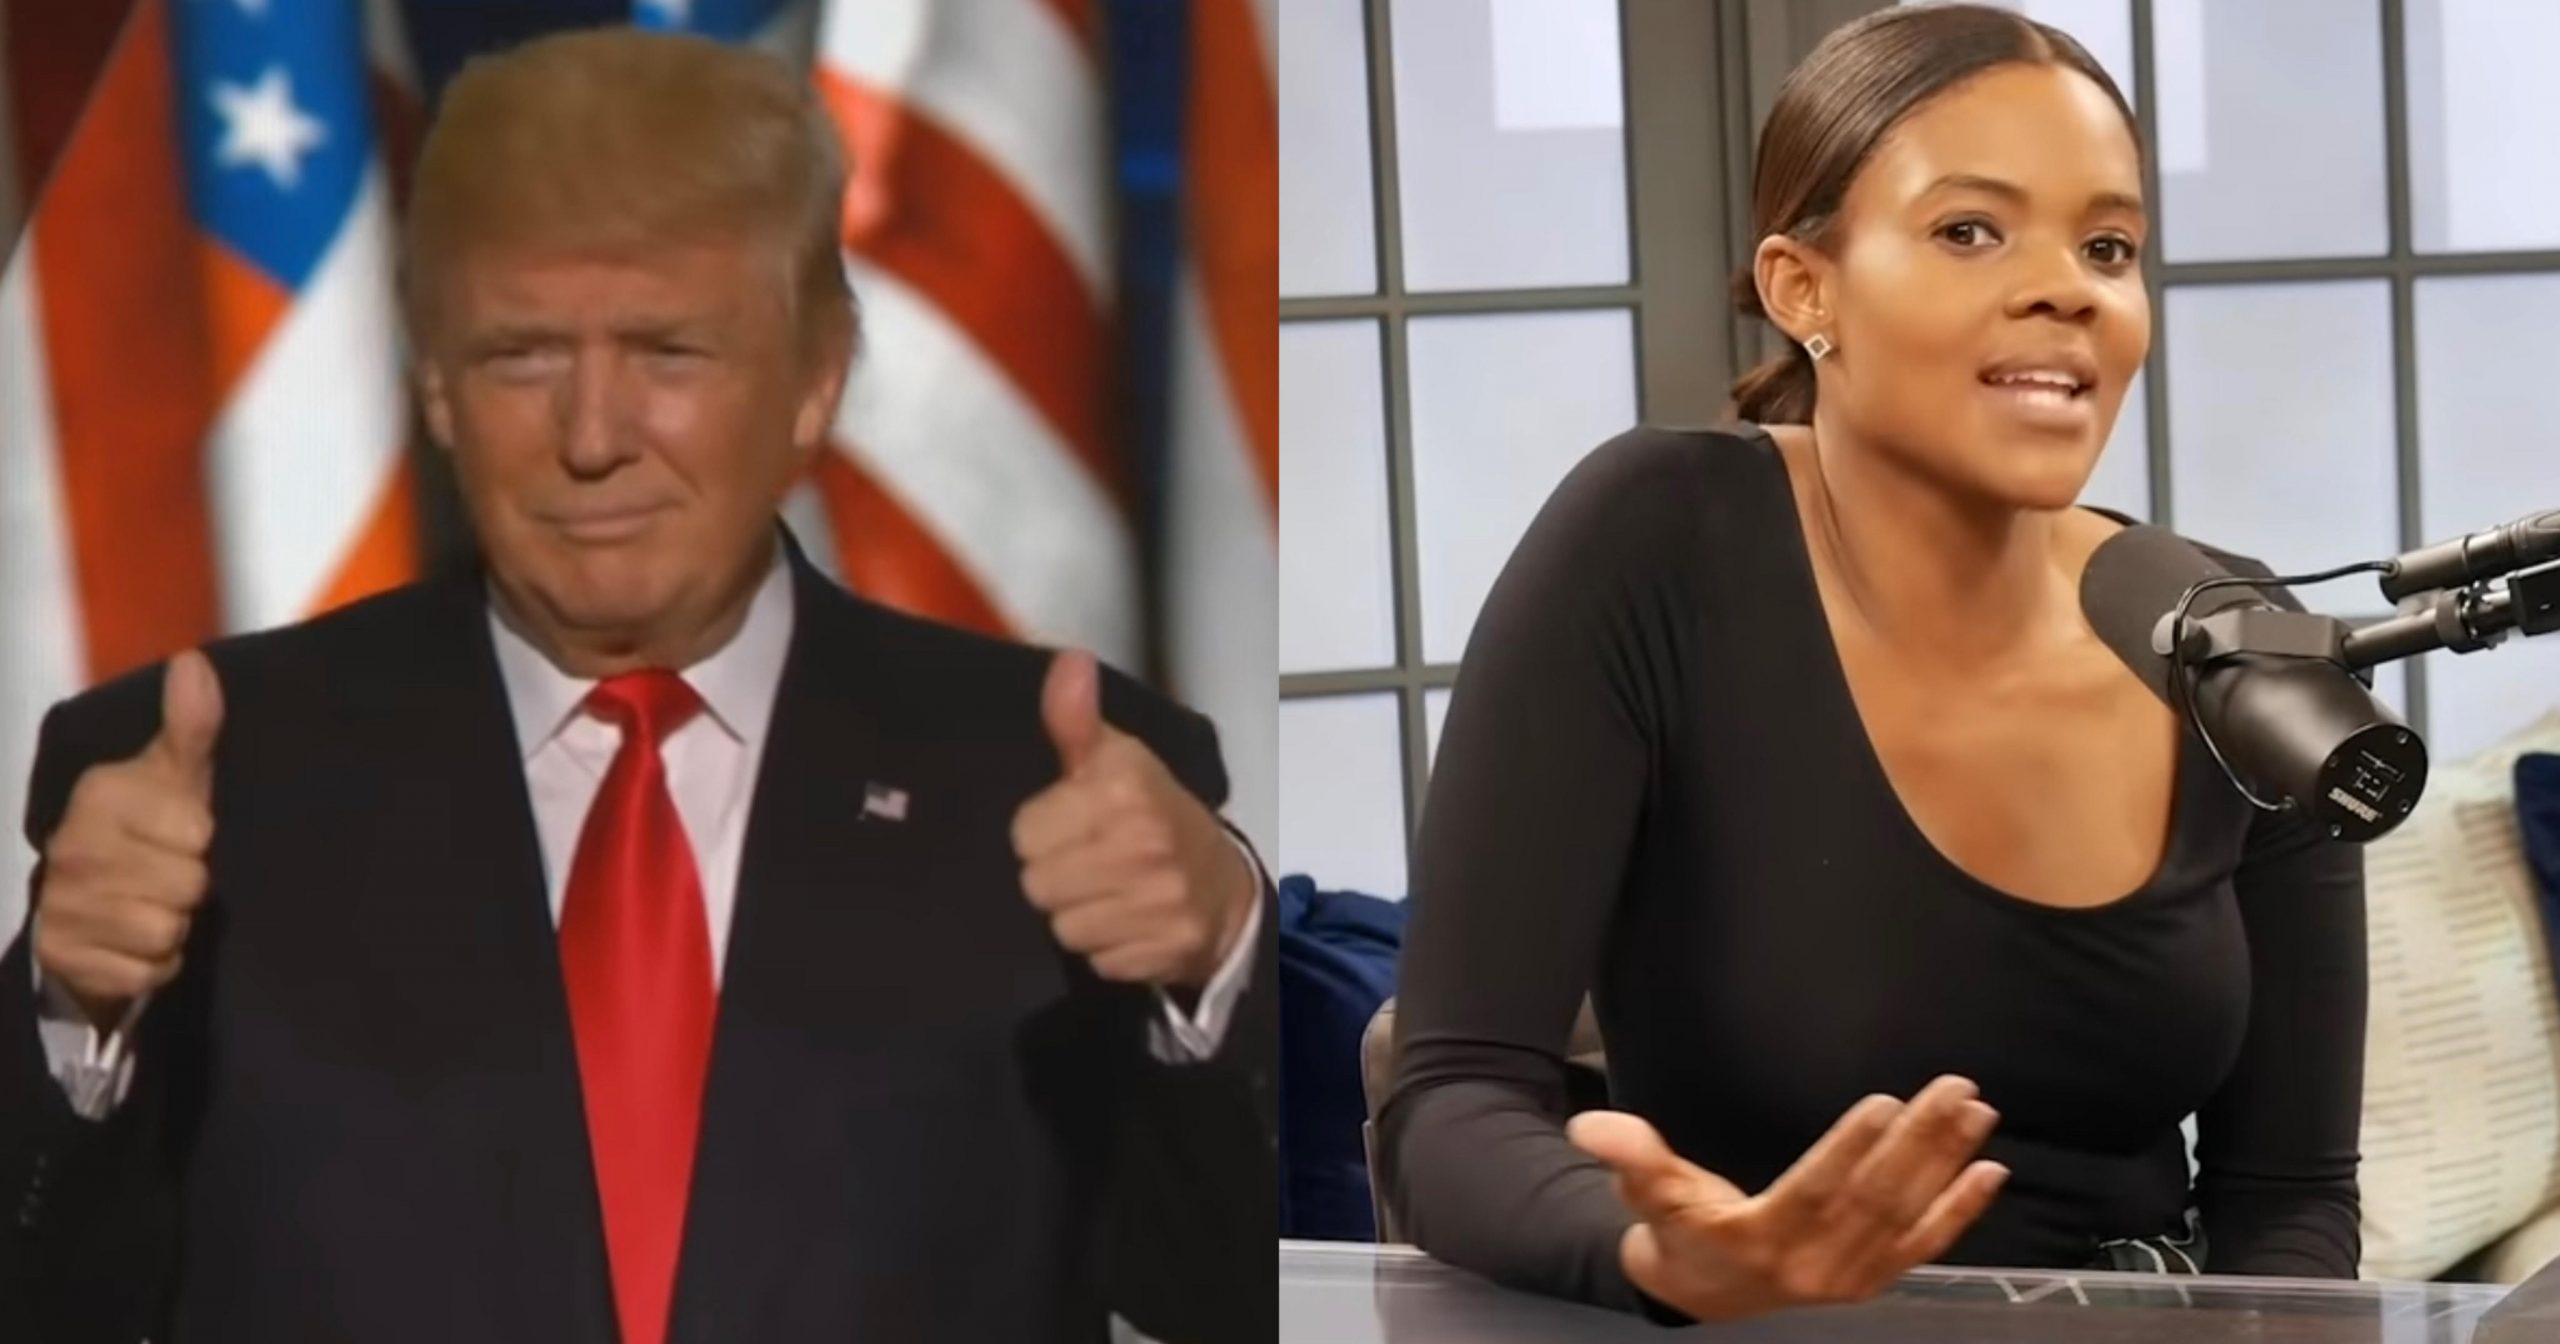 Trump Hints at Run in 2024 in New Candace Owens Interview Where She